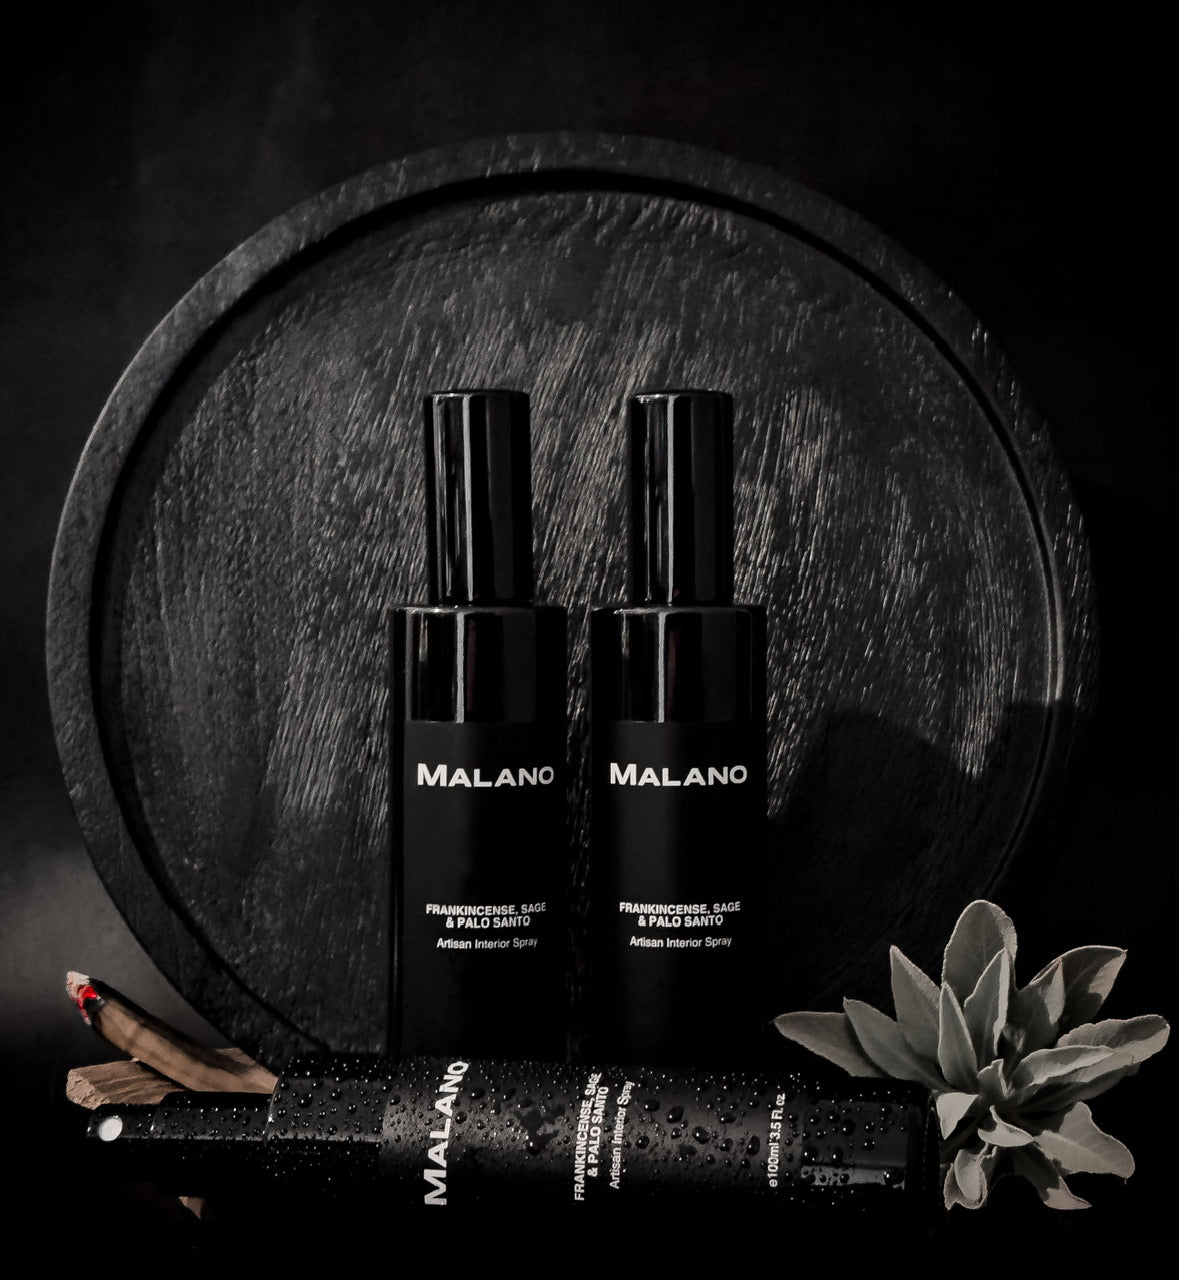 3 Spray Bottles of Frankincense, Sage and Palo Santo interior spray by Malano, two standing and one on its side covered in drops of water are sitting in front of a circular black textured wooden board and softly lit against a black background. To the right side is a sprig of sage and to the left side, three sticks of Palo Santo with one lit and smoke wafting upwards.